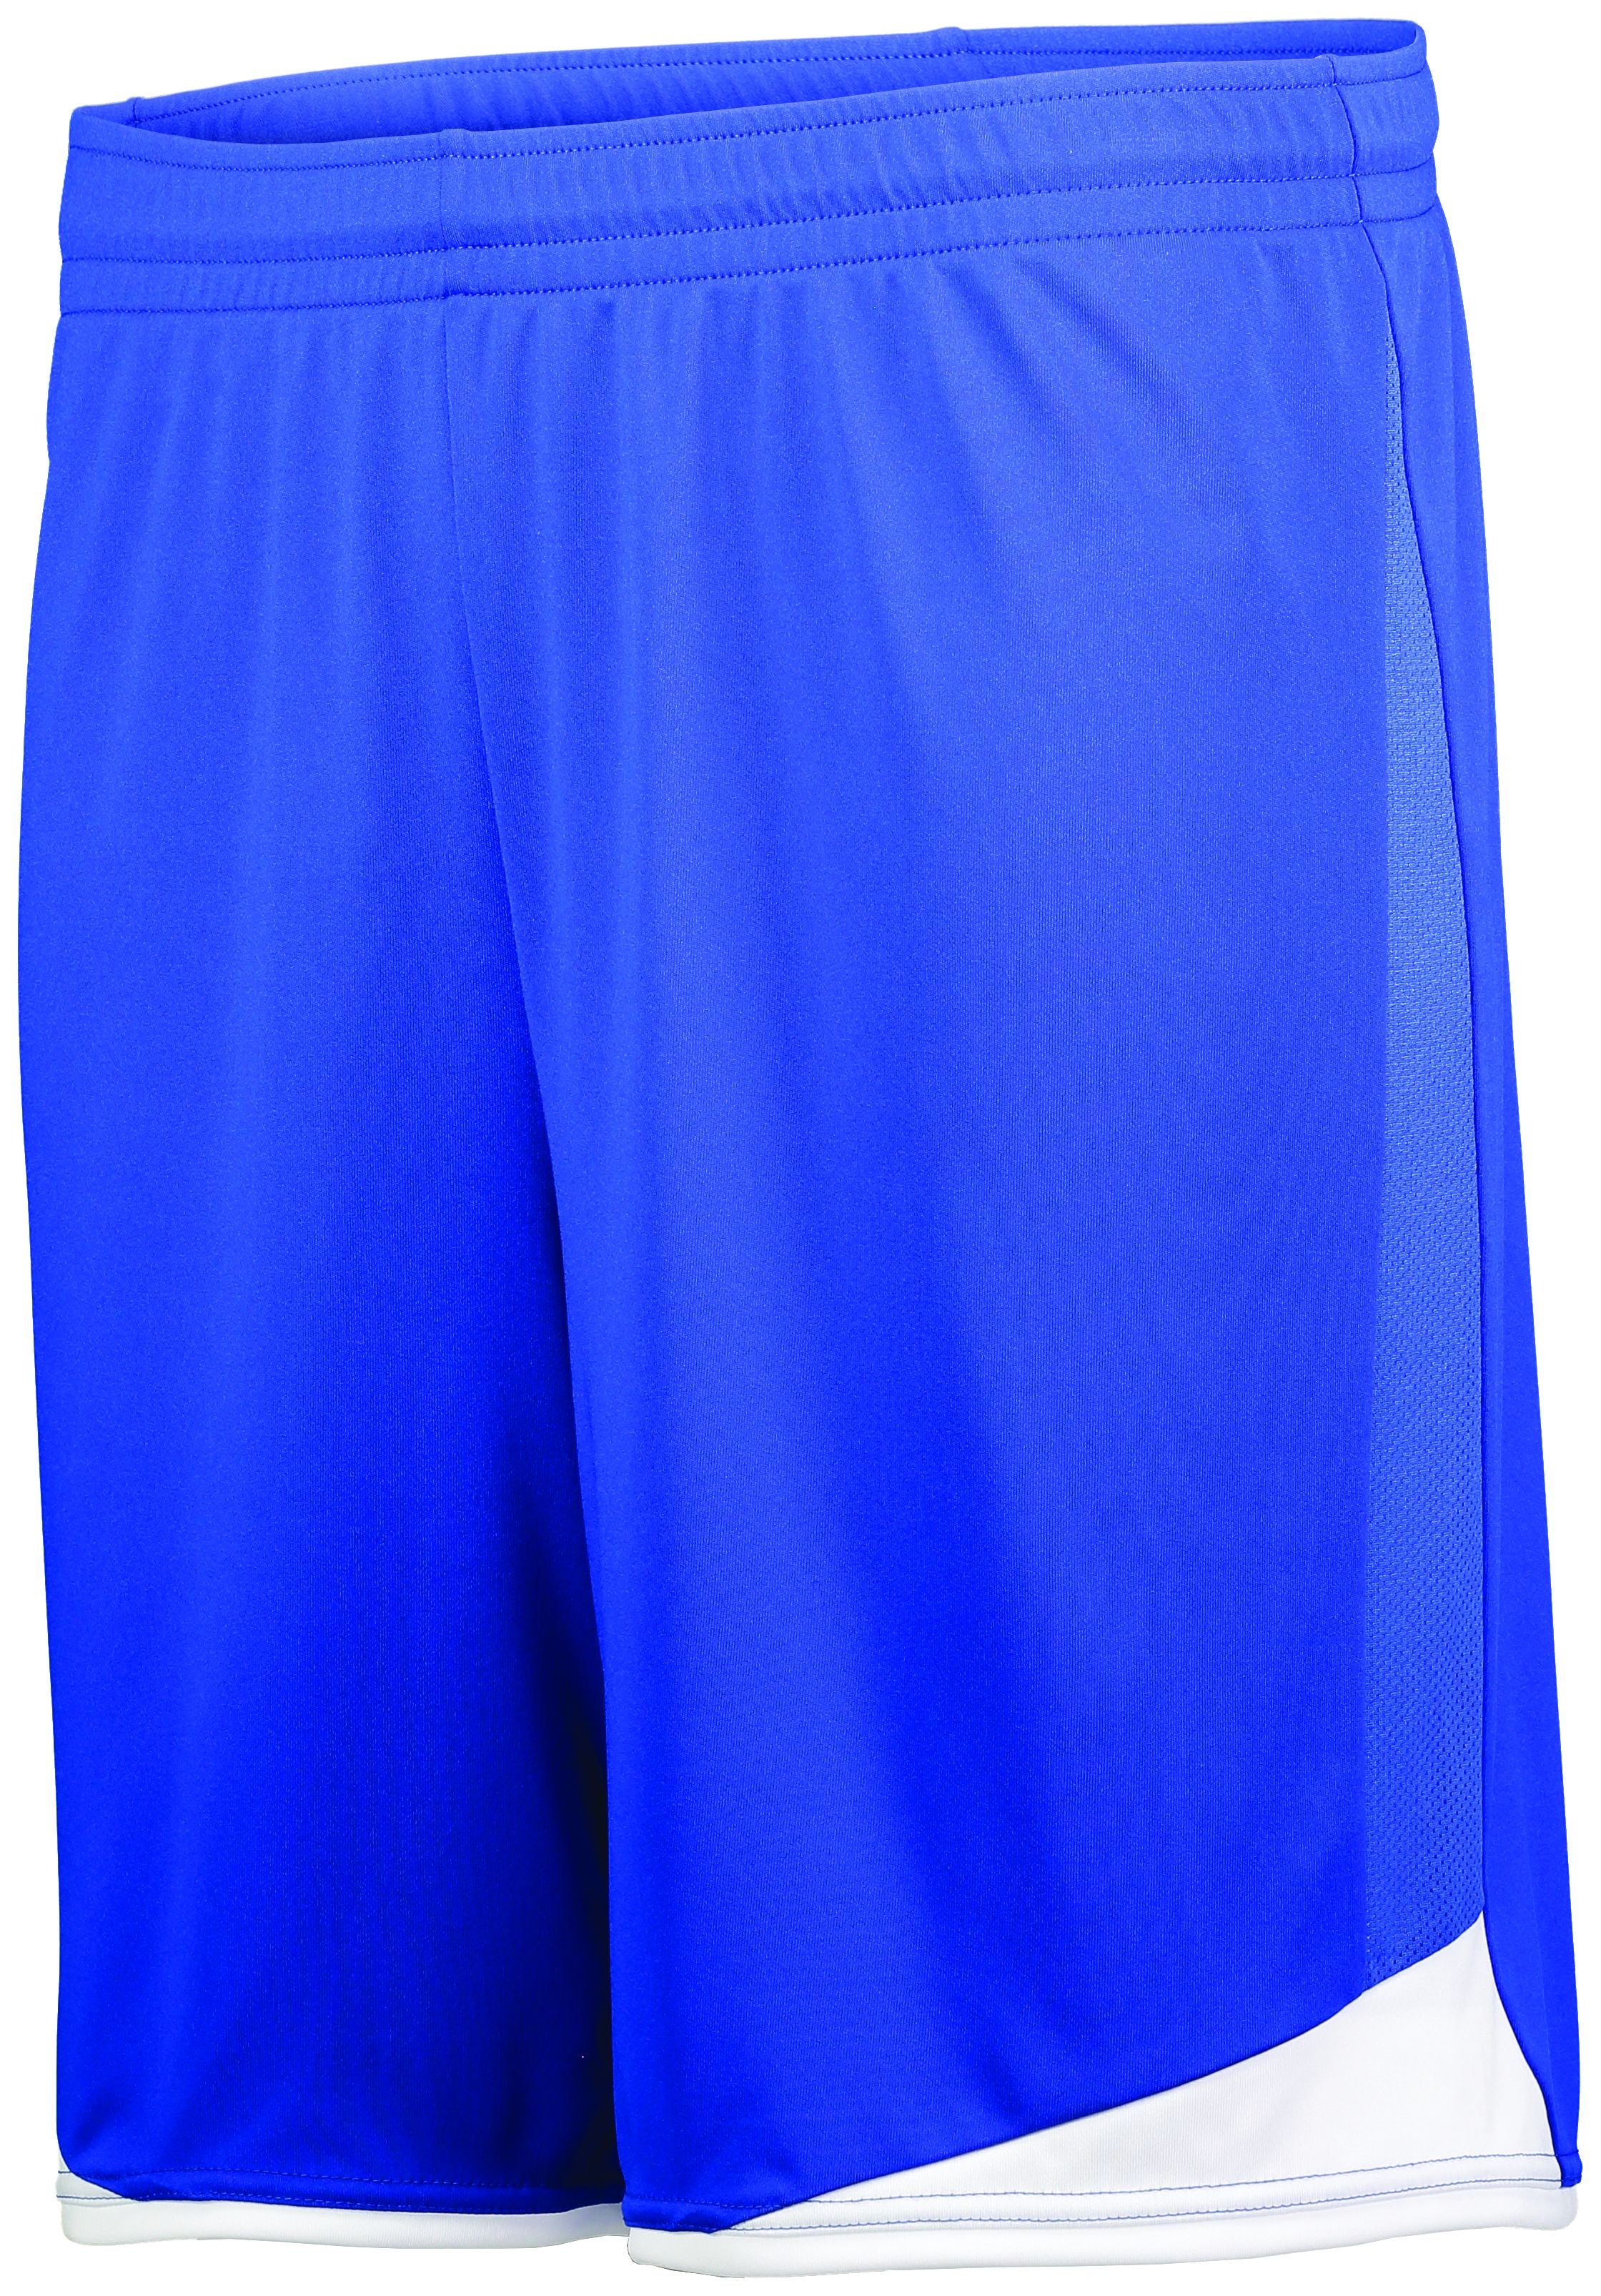 High 5 Stamford Soccer Shorts in Royal/White  -Part of the Adult, Adult-Shorts, High5-Products, Soccer, All-Sports-1 product lines at KanaleyCreations.com